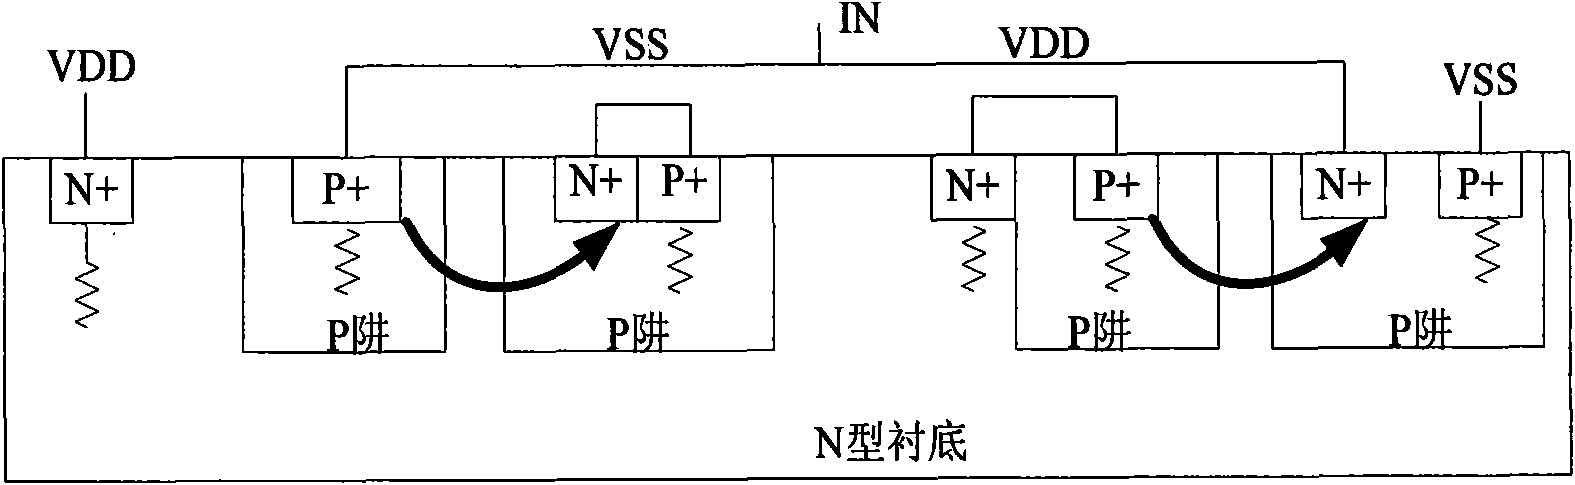 Electrostatic discharge prevention circuit based on complementary SCR (Silicon Controlled Rectifier)